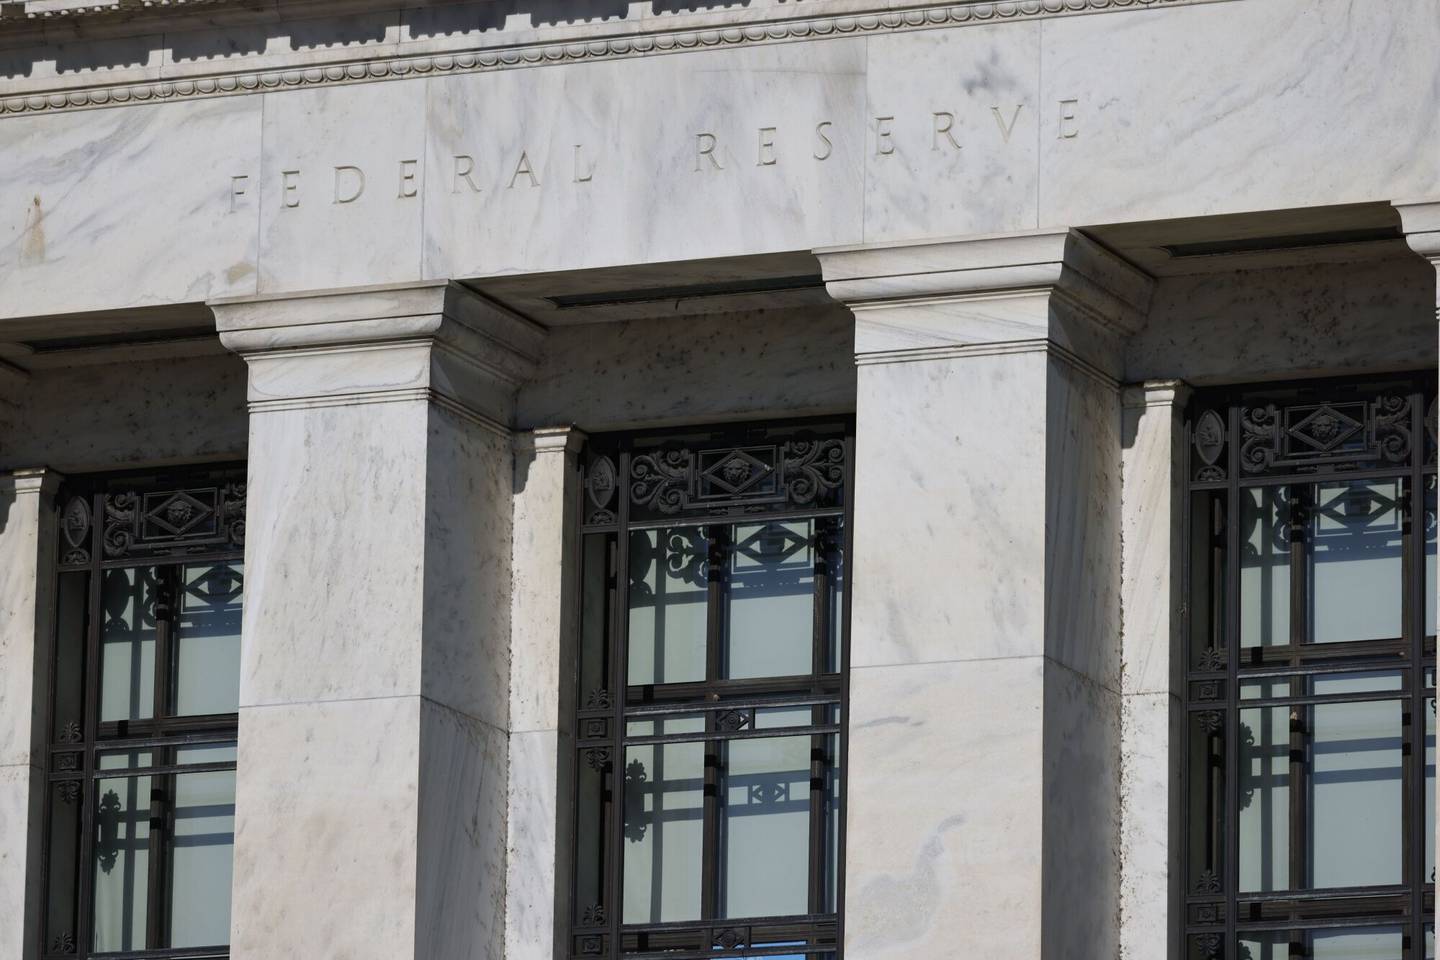 The Marriner S. Eccles Federal Reserve building in Washington, DC, US, on Friday, Dec. 30, 2022.